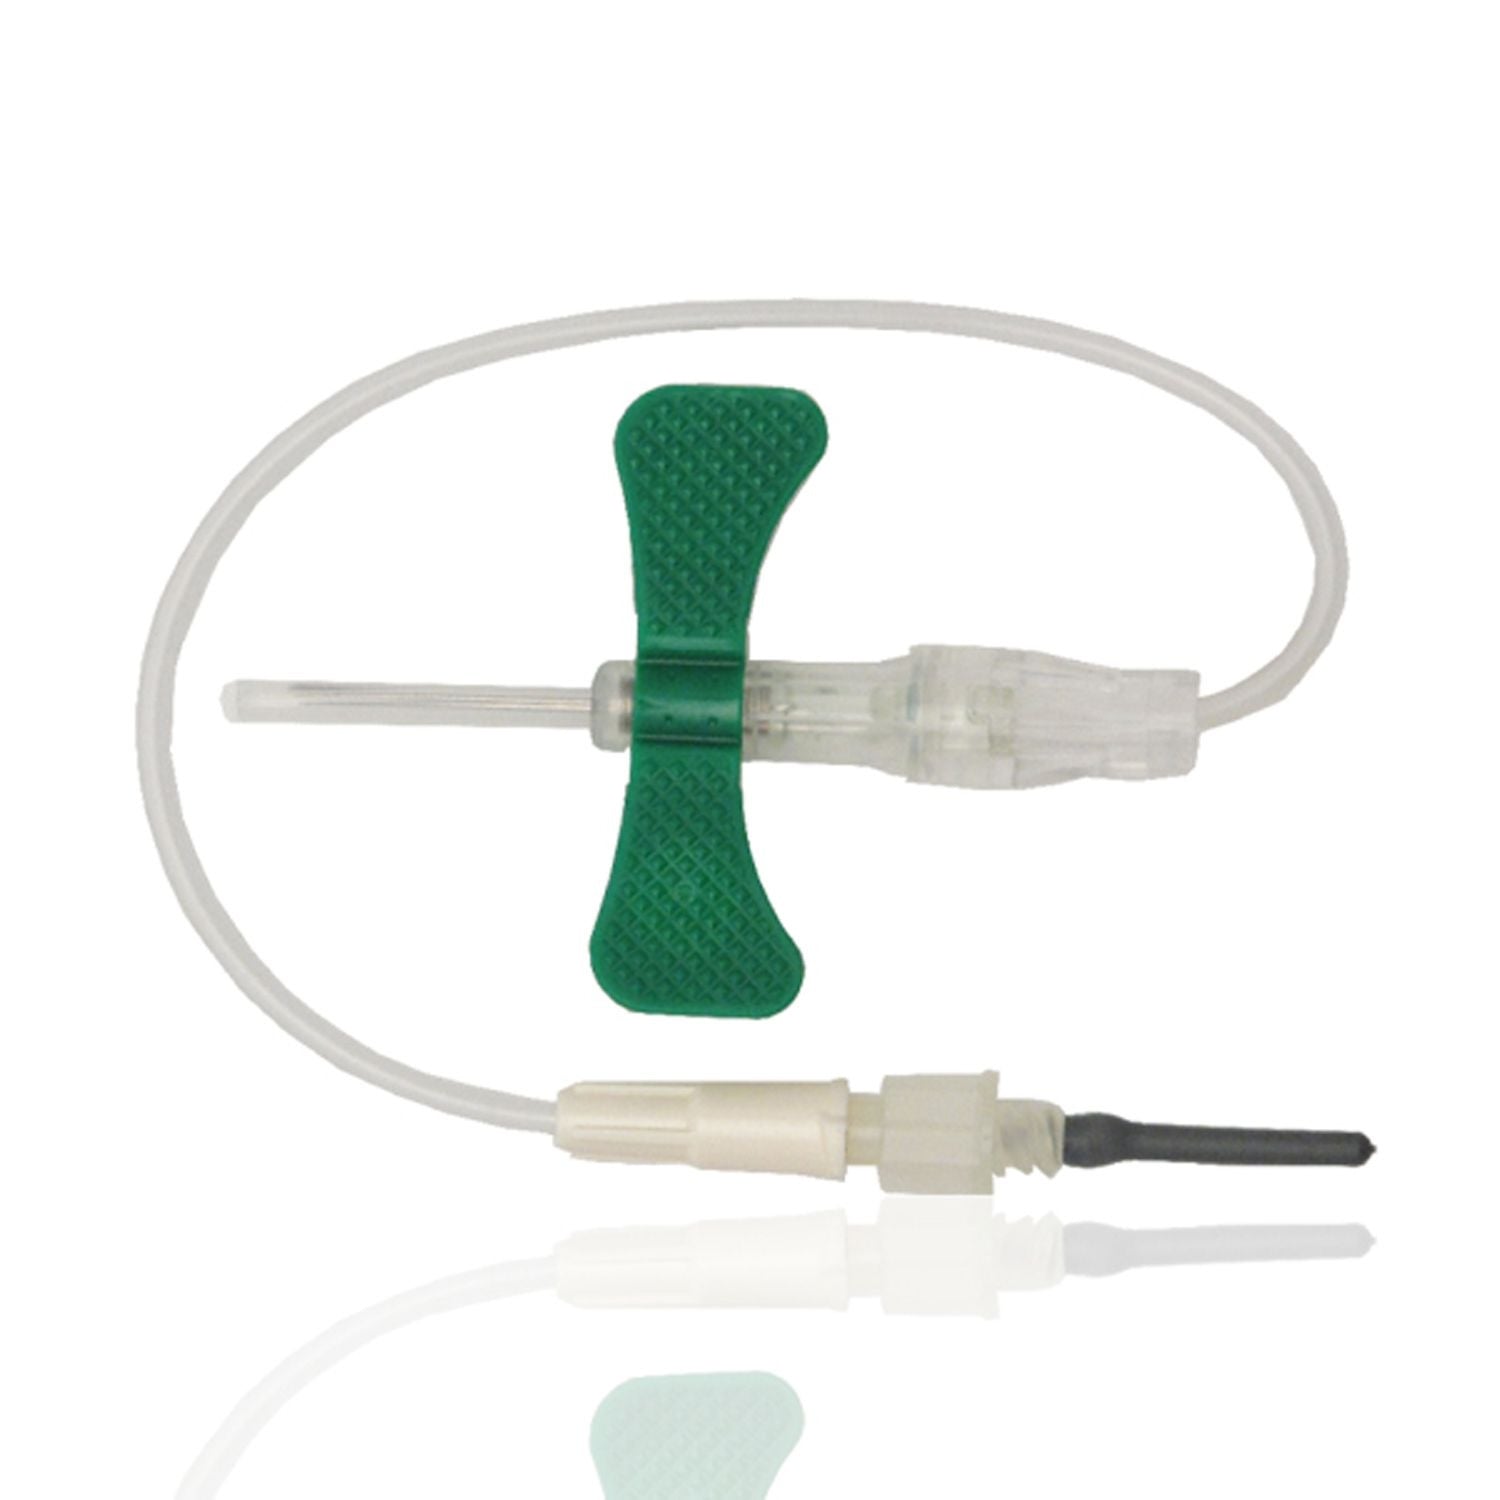 BD Vacutainer Push Button Blood Collection System | Luer Adapter | 23G x 12" Tubing | 0.75" Needle | Pack of 200